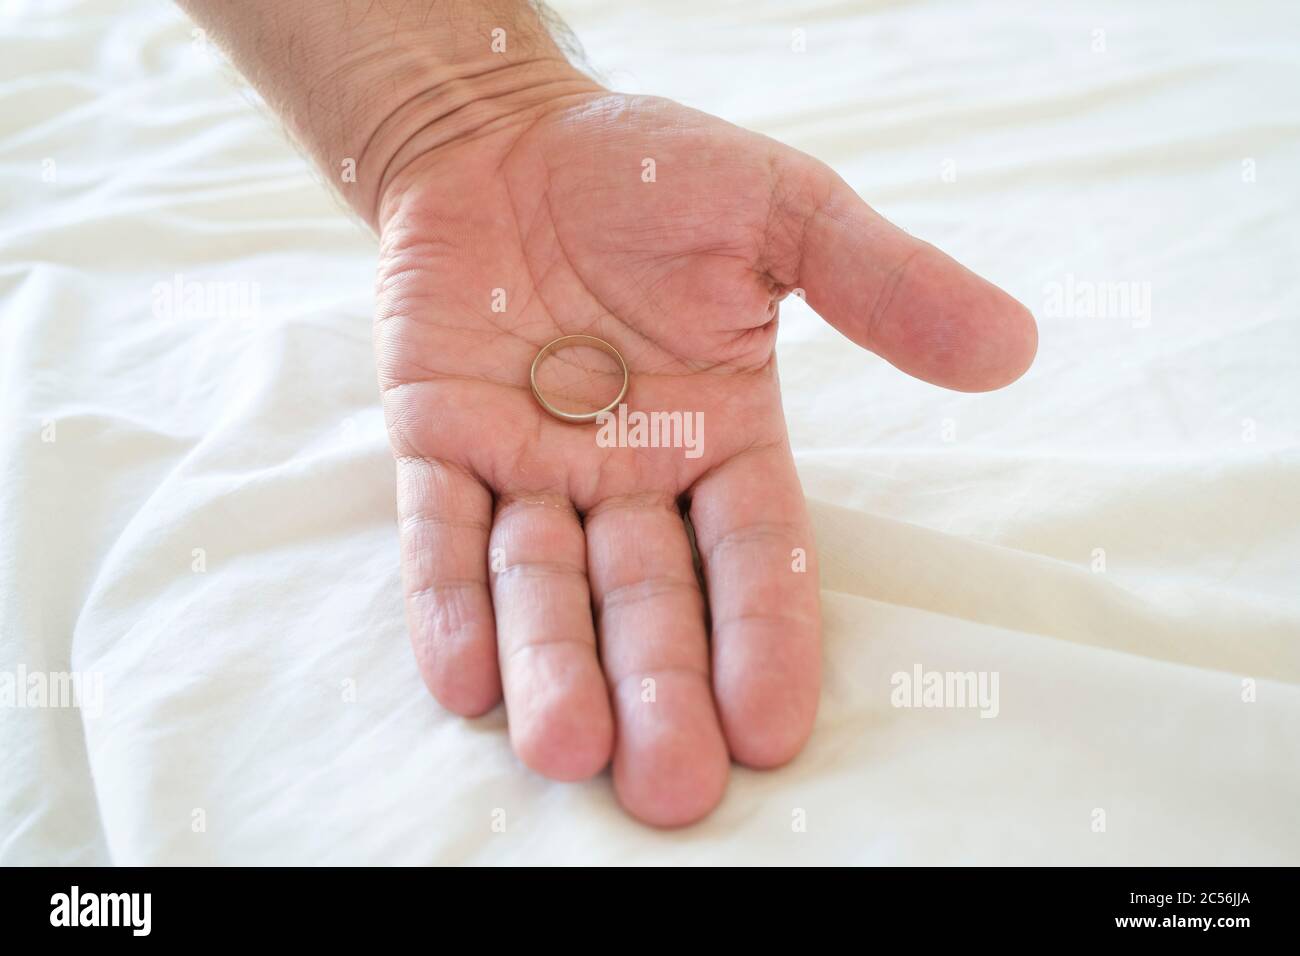 Hand of a man holding a wedding ring Stock Photo